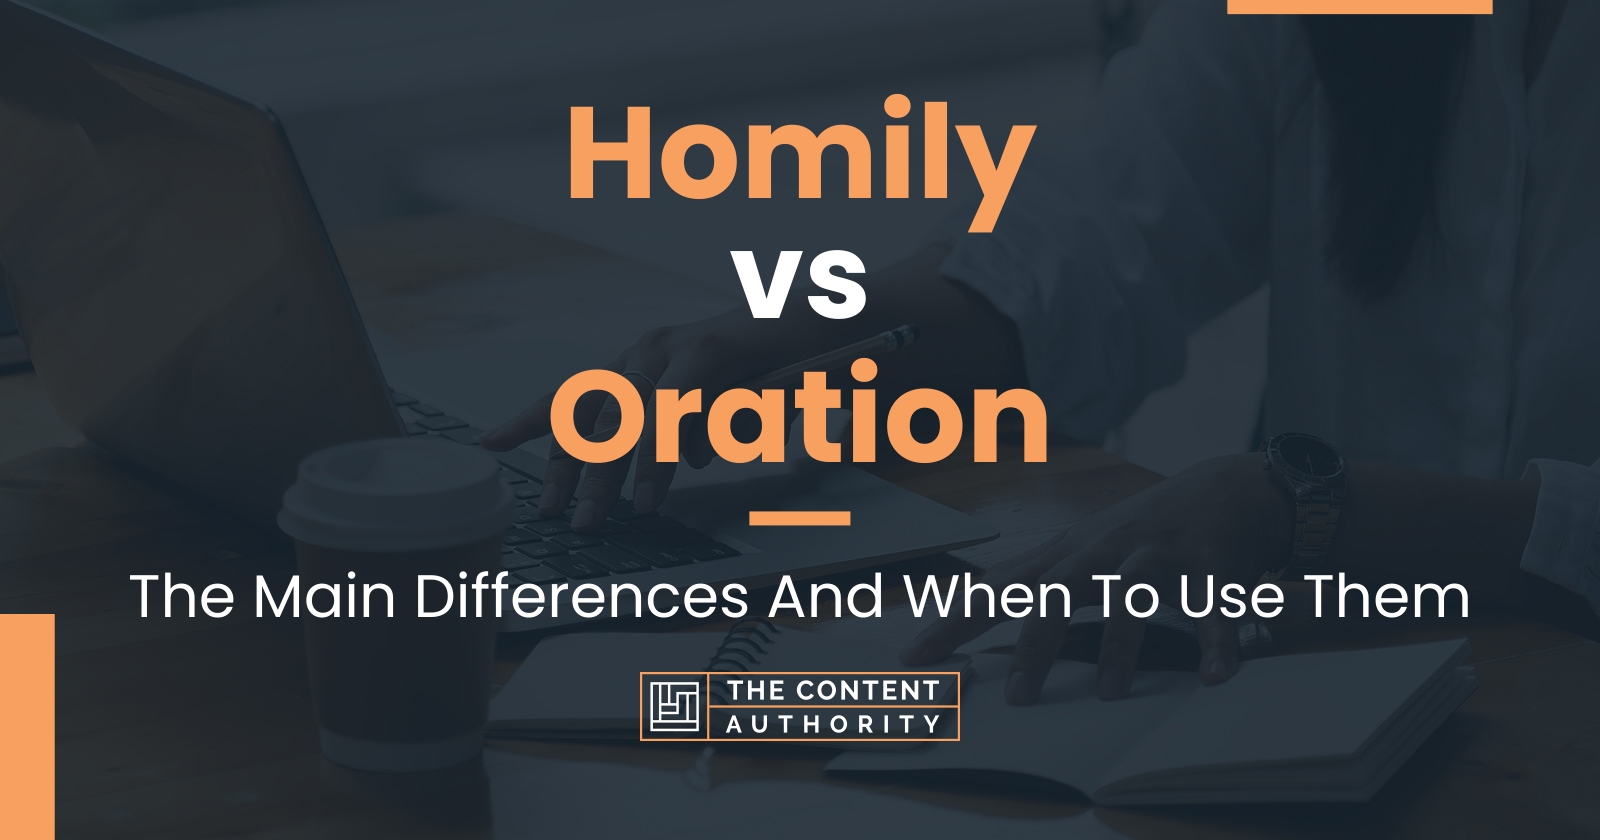 Homily vs Oration: The Main Differences And When To Use Them